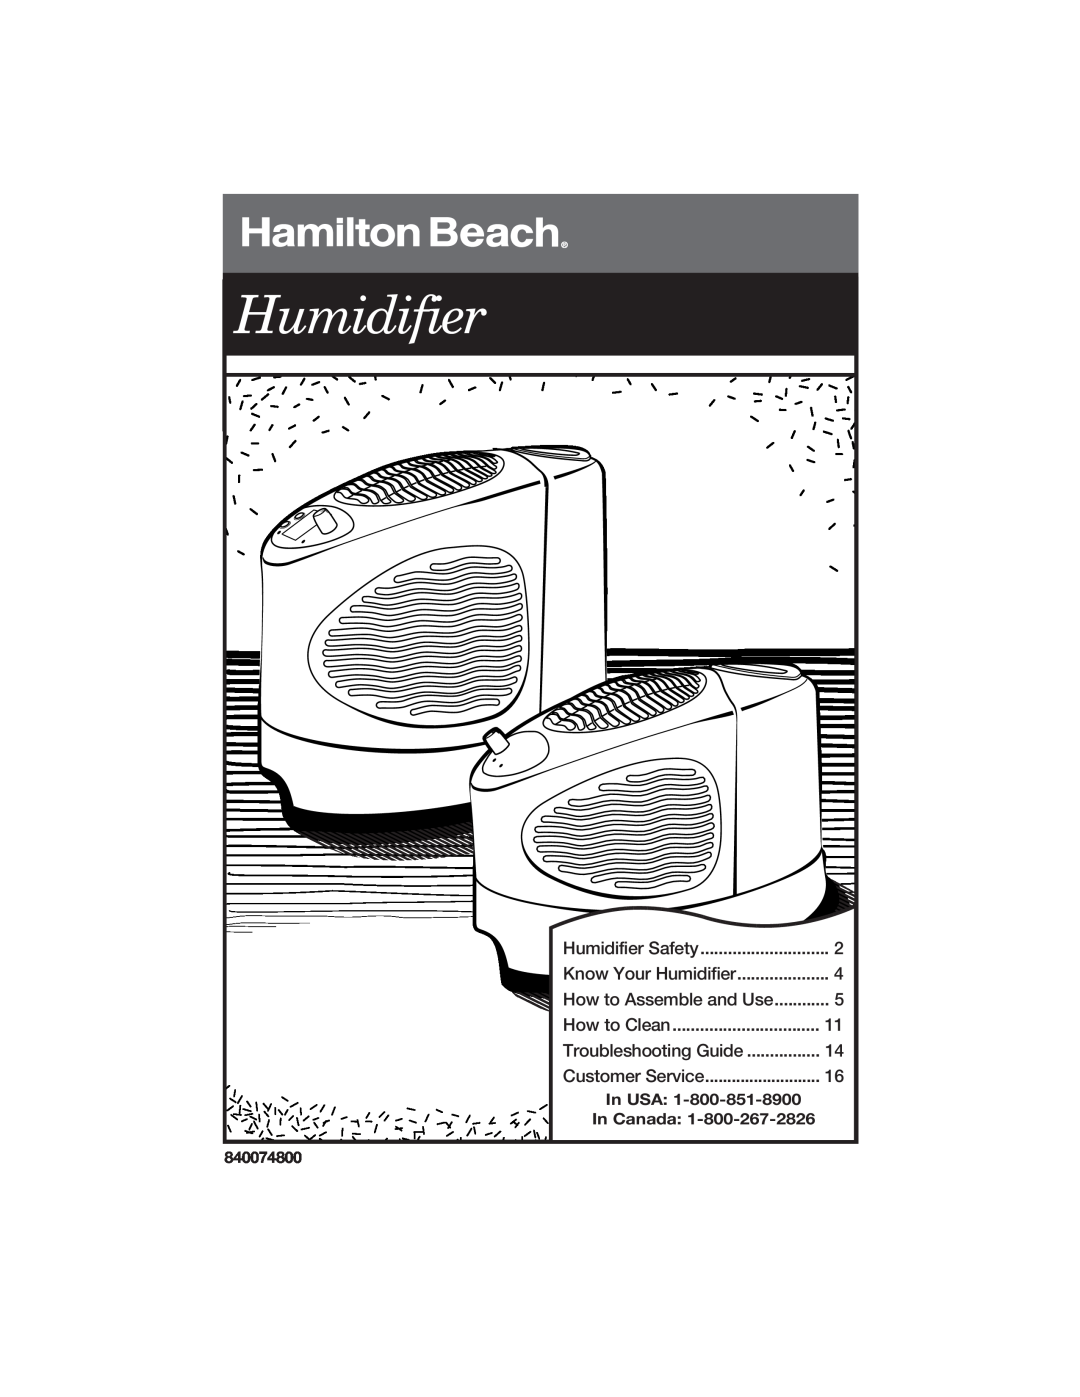 Hamilton Beach 840074800 manual Humidifier Safety, Know Your Humidifier, How to Assemble and Use, How to Clean, In USA 